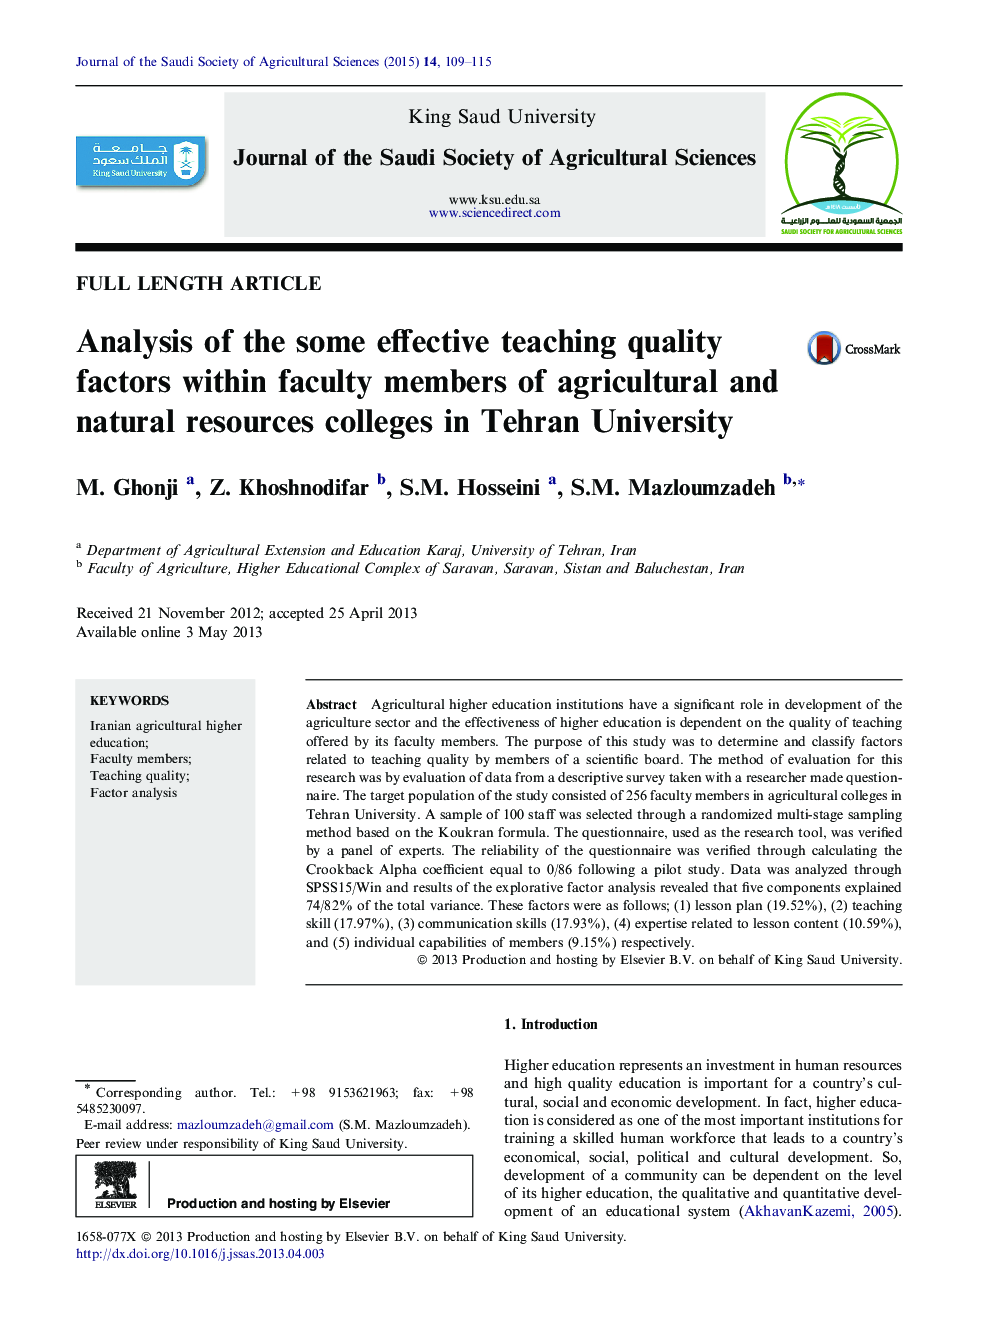 Analysis of the some effective teaching quality factors within faculty members of agricultural and natural resources colleges in Tehran University 